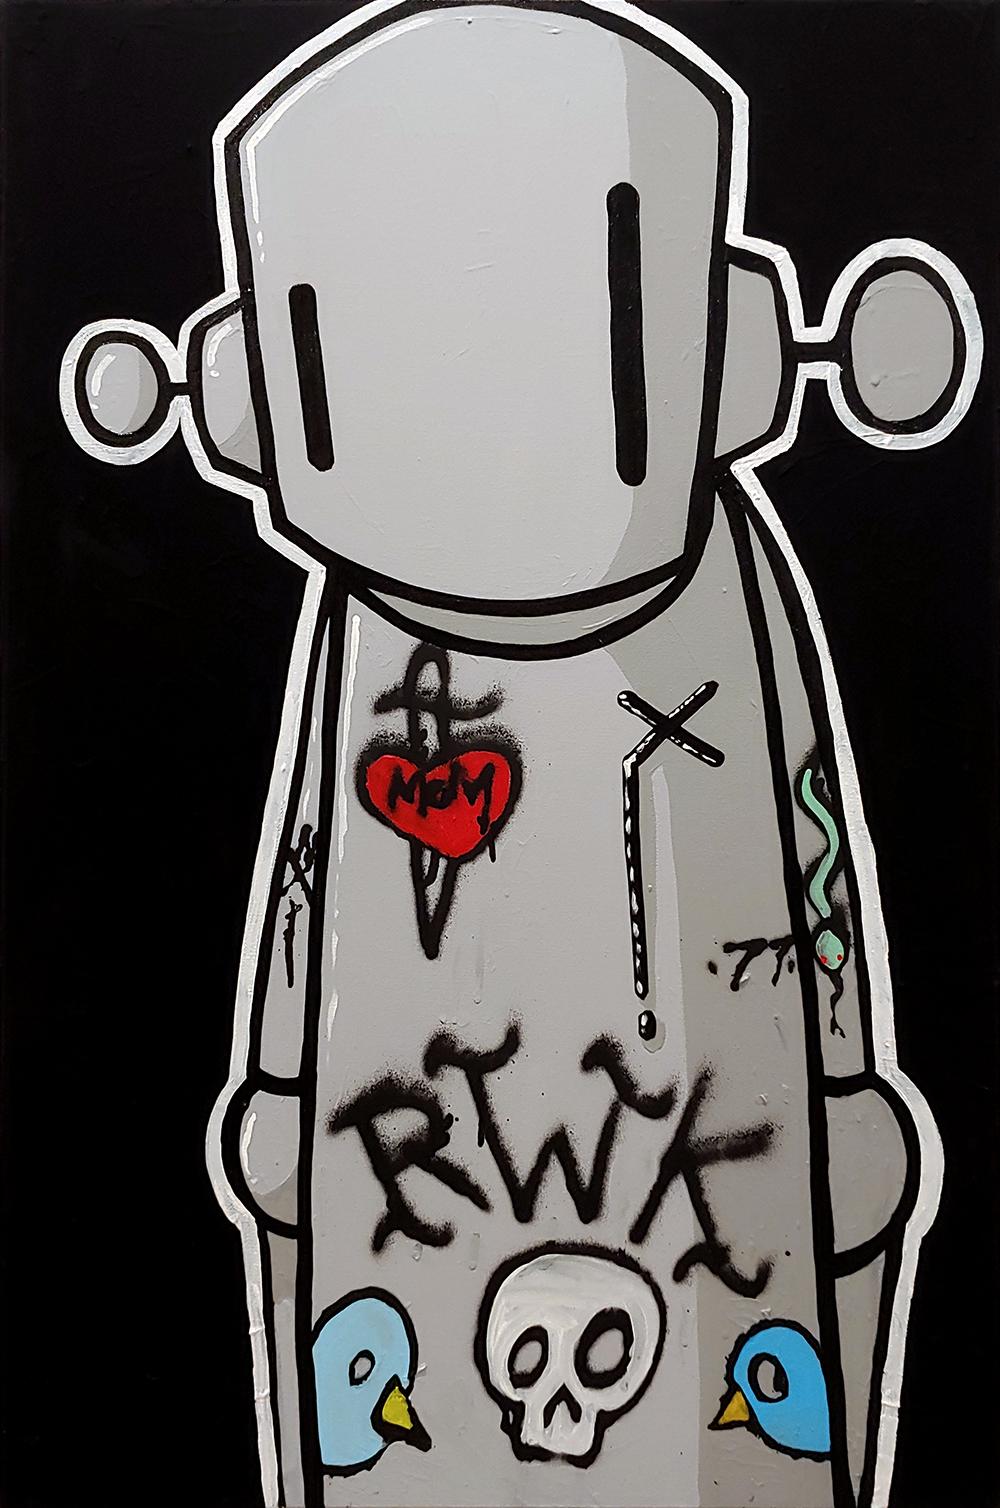 "Painted For Life"  The Tattooed Robot 36x24 acrylic on Canvas